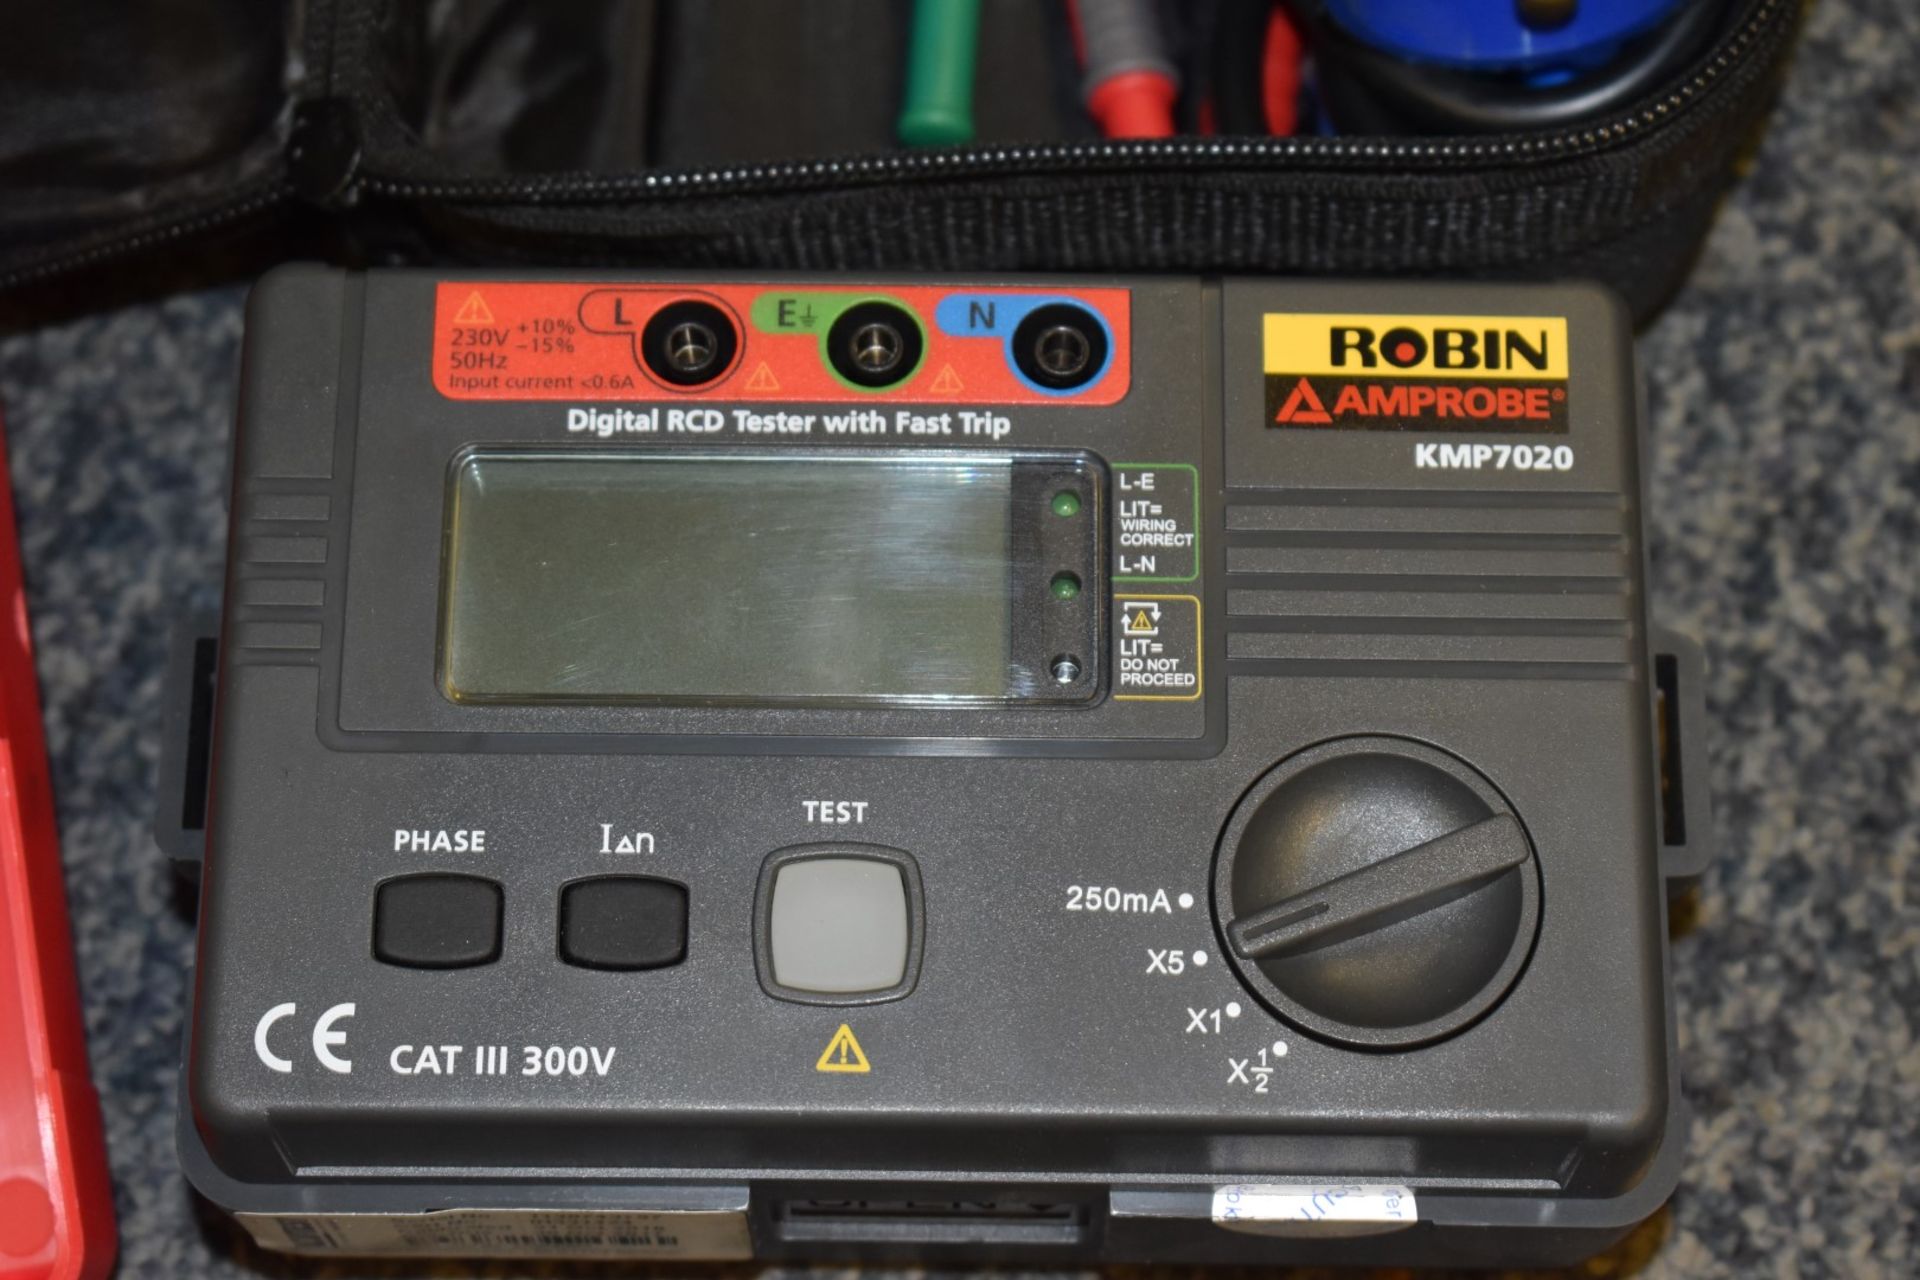 1 x Robin Amprobe Digital RCD Tester Wth Fast Trip - Model KMP7020 - With Accessories and Carry Case - Image 3 of 4